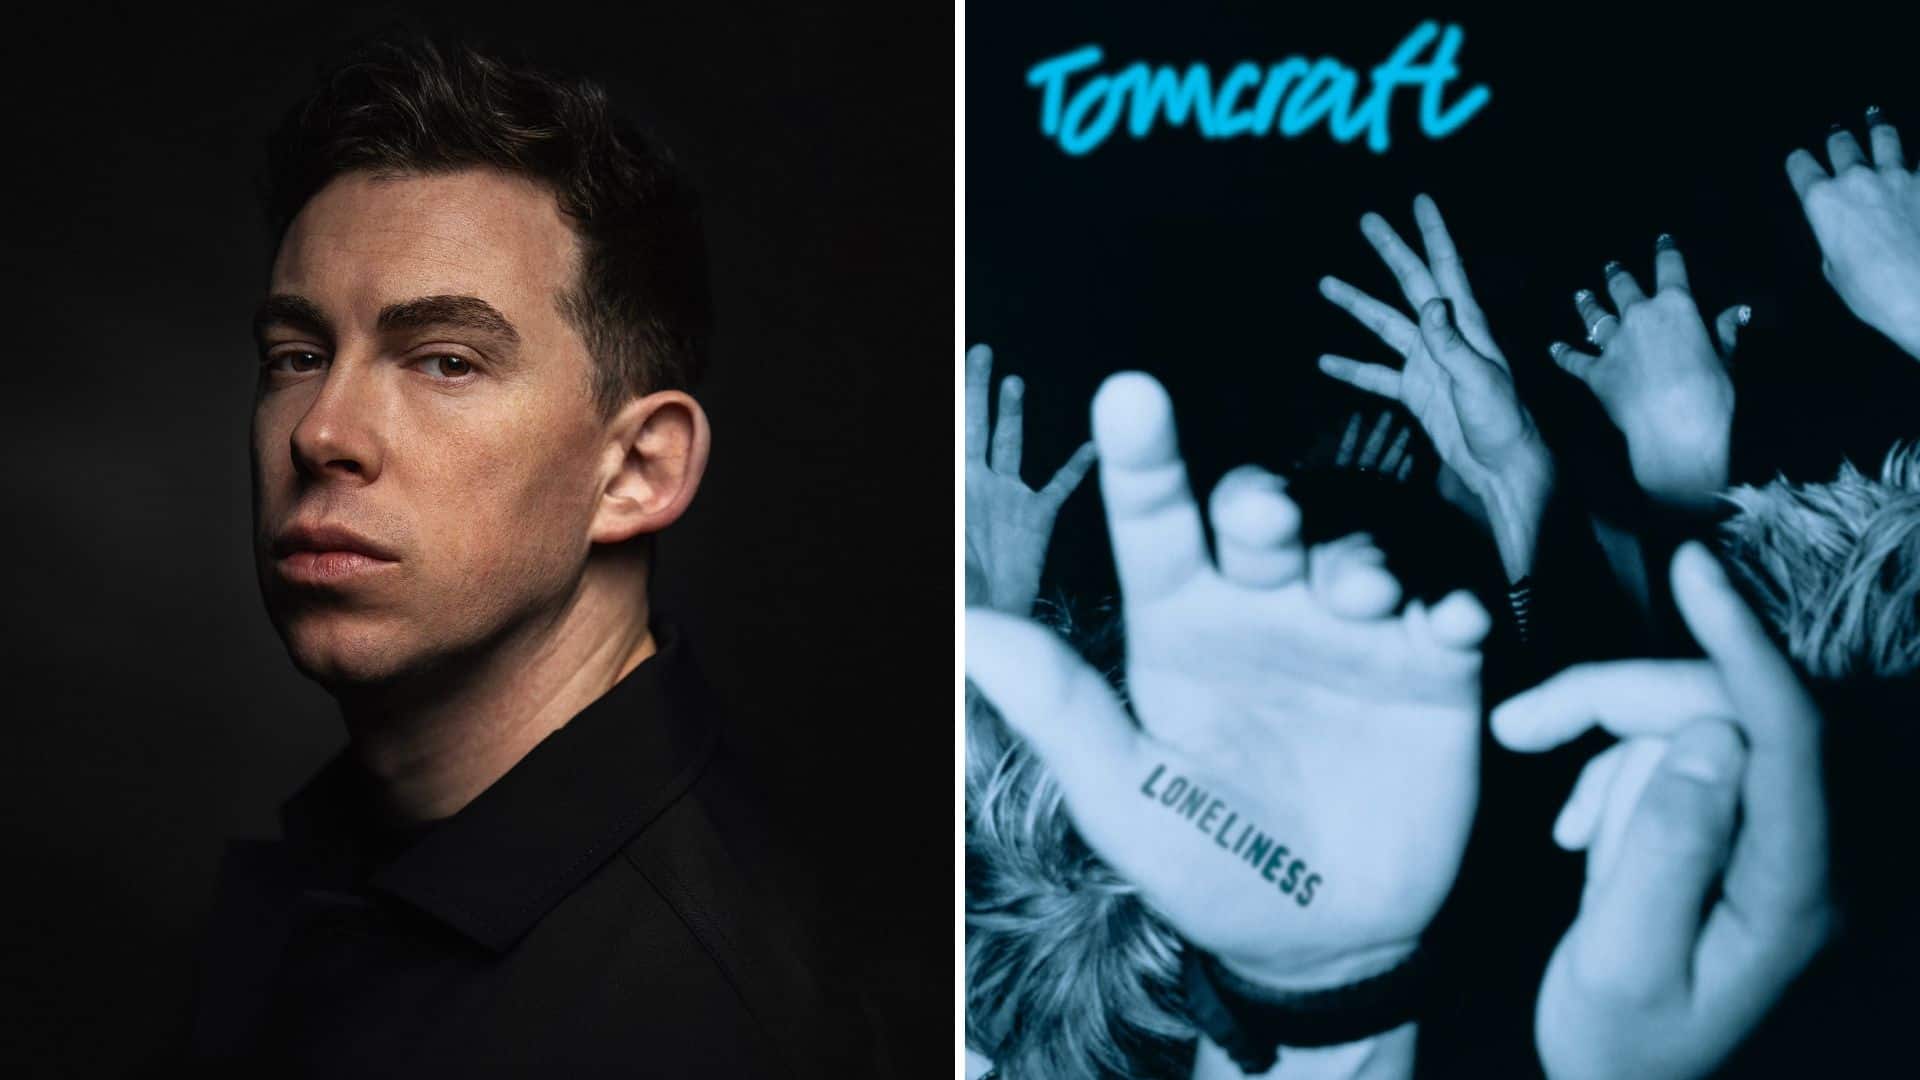 Hardwell revives Tomcraft trance classic ‘Loneliness’ in DJs From Mars & Tomcraft collab: Listen